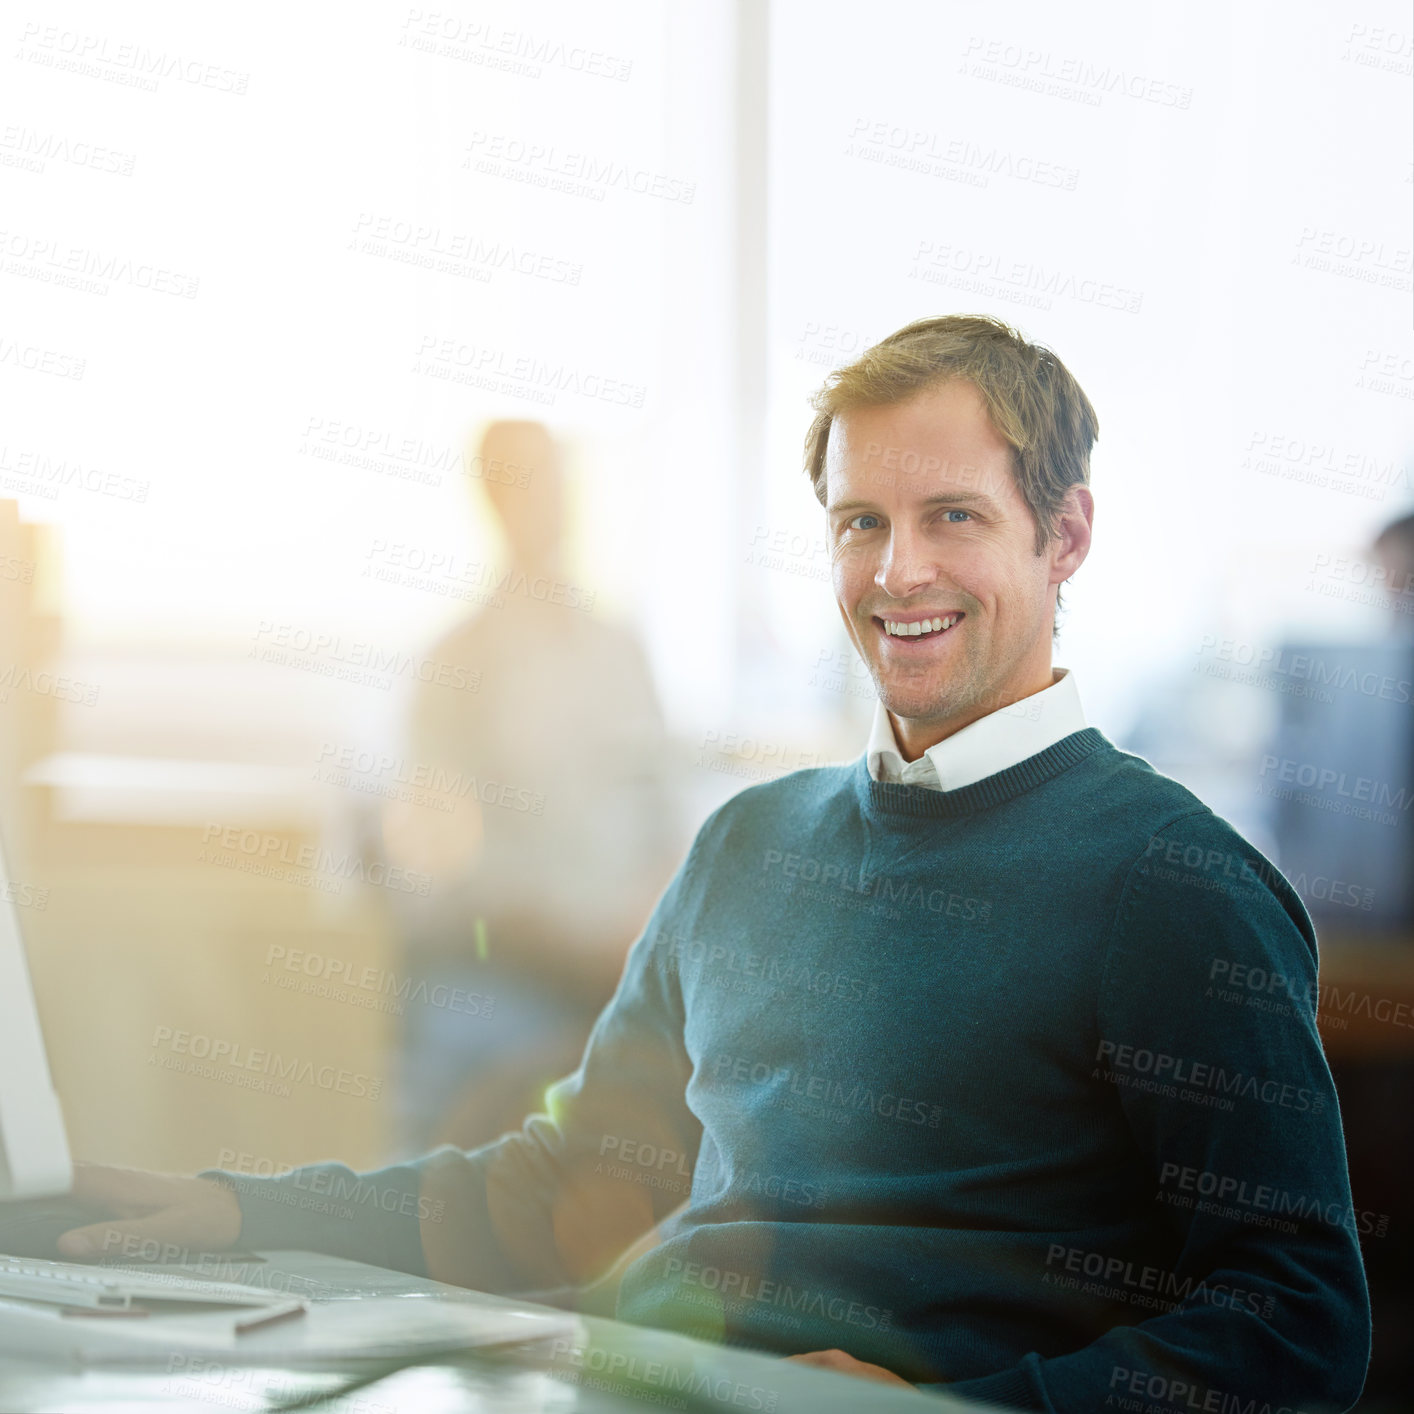 Buy stock photo Happy business man with a positive mindset in an office working on an innovation growth project. Portrait of a startup entrepreneur smiling about the progress, mission and vision of his company